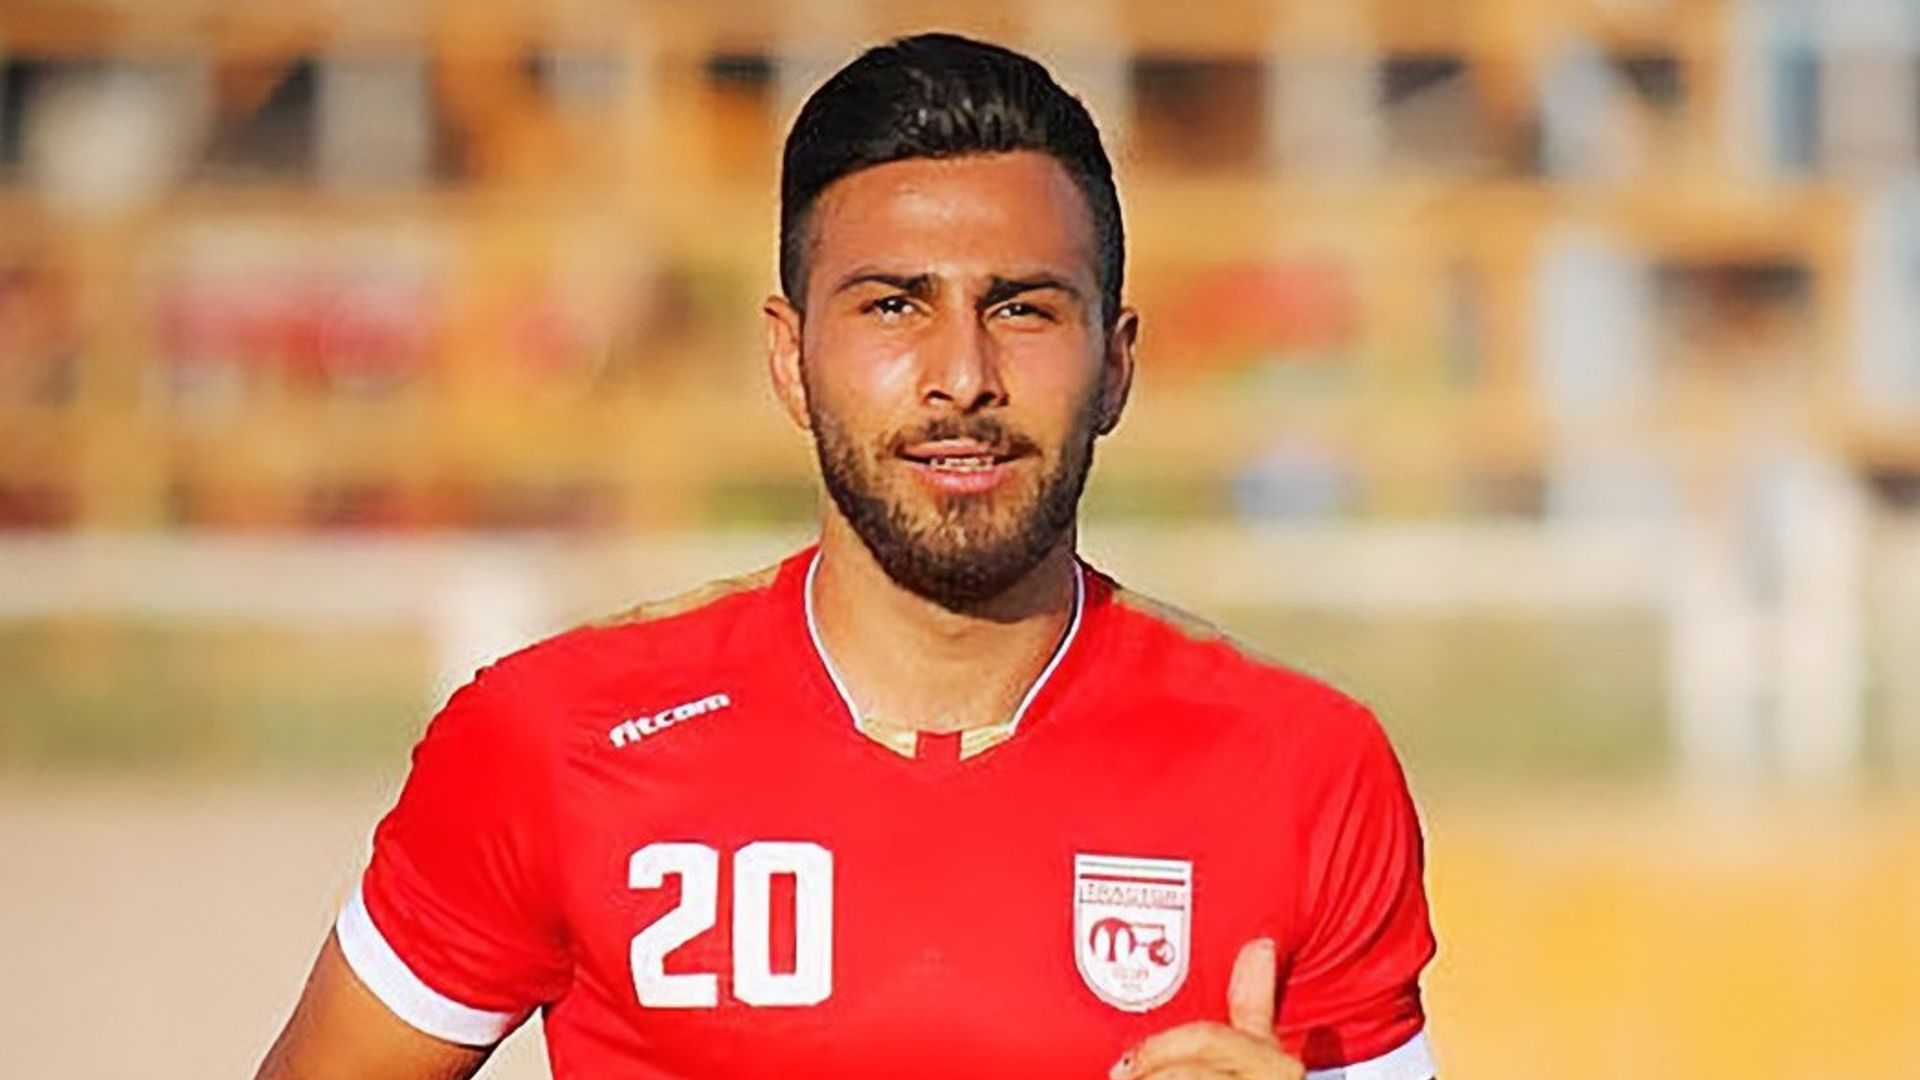 'A really kind guy': Team-mate of Iran footballer facing death penalty speaks out